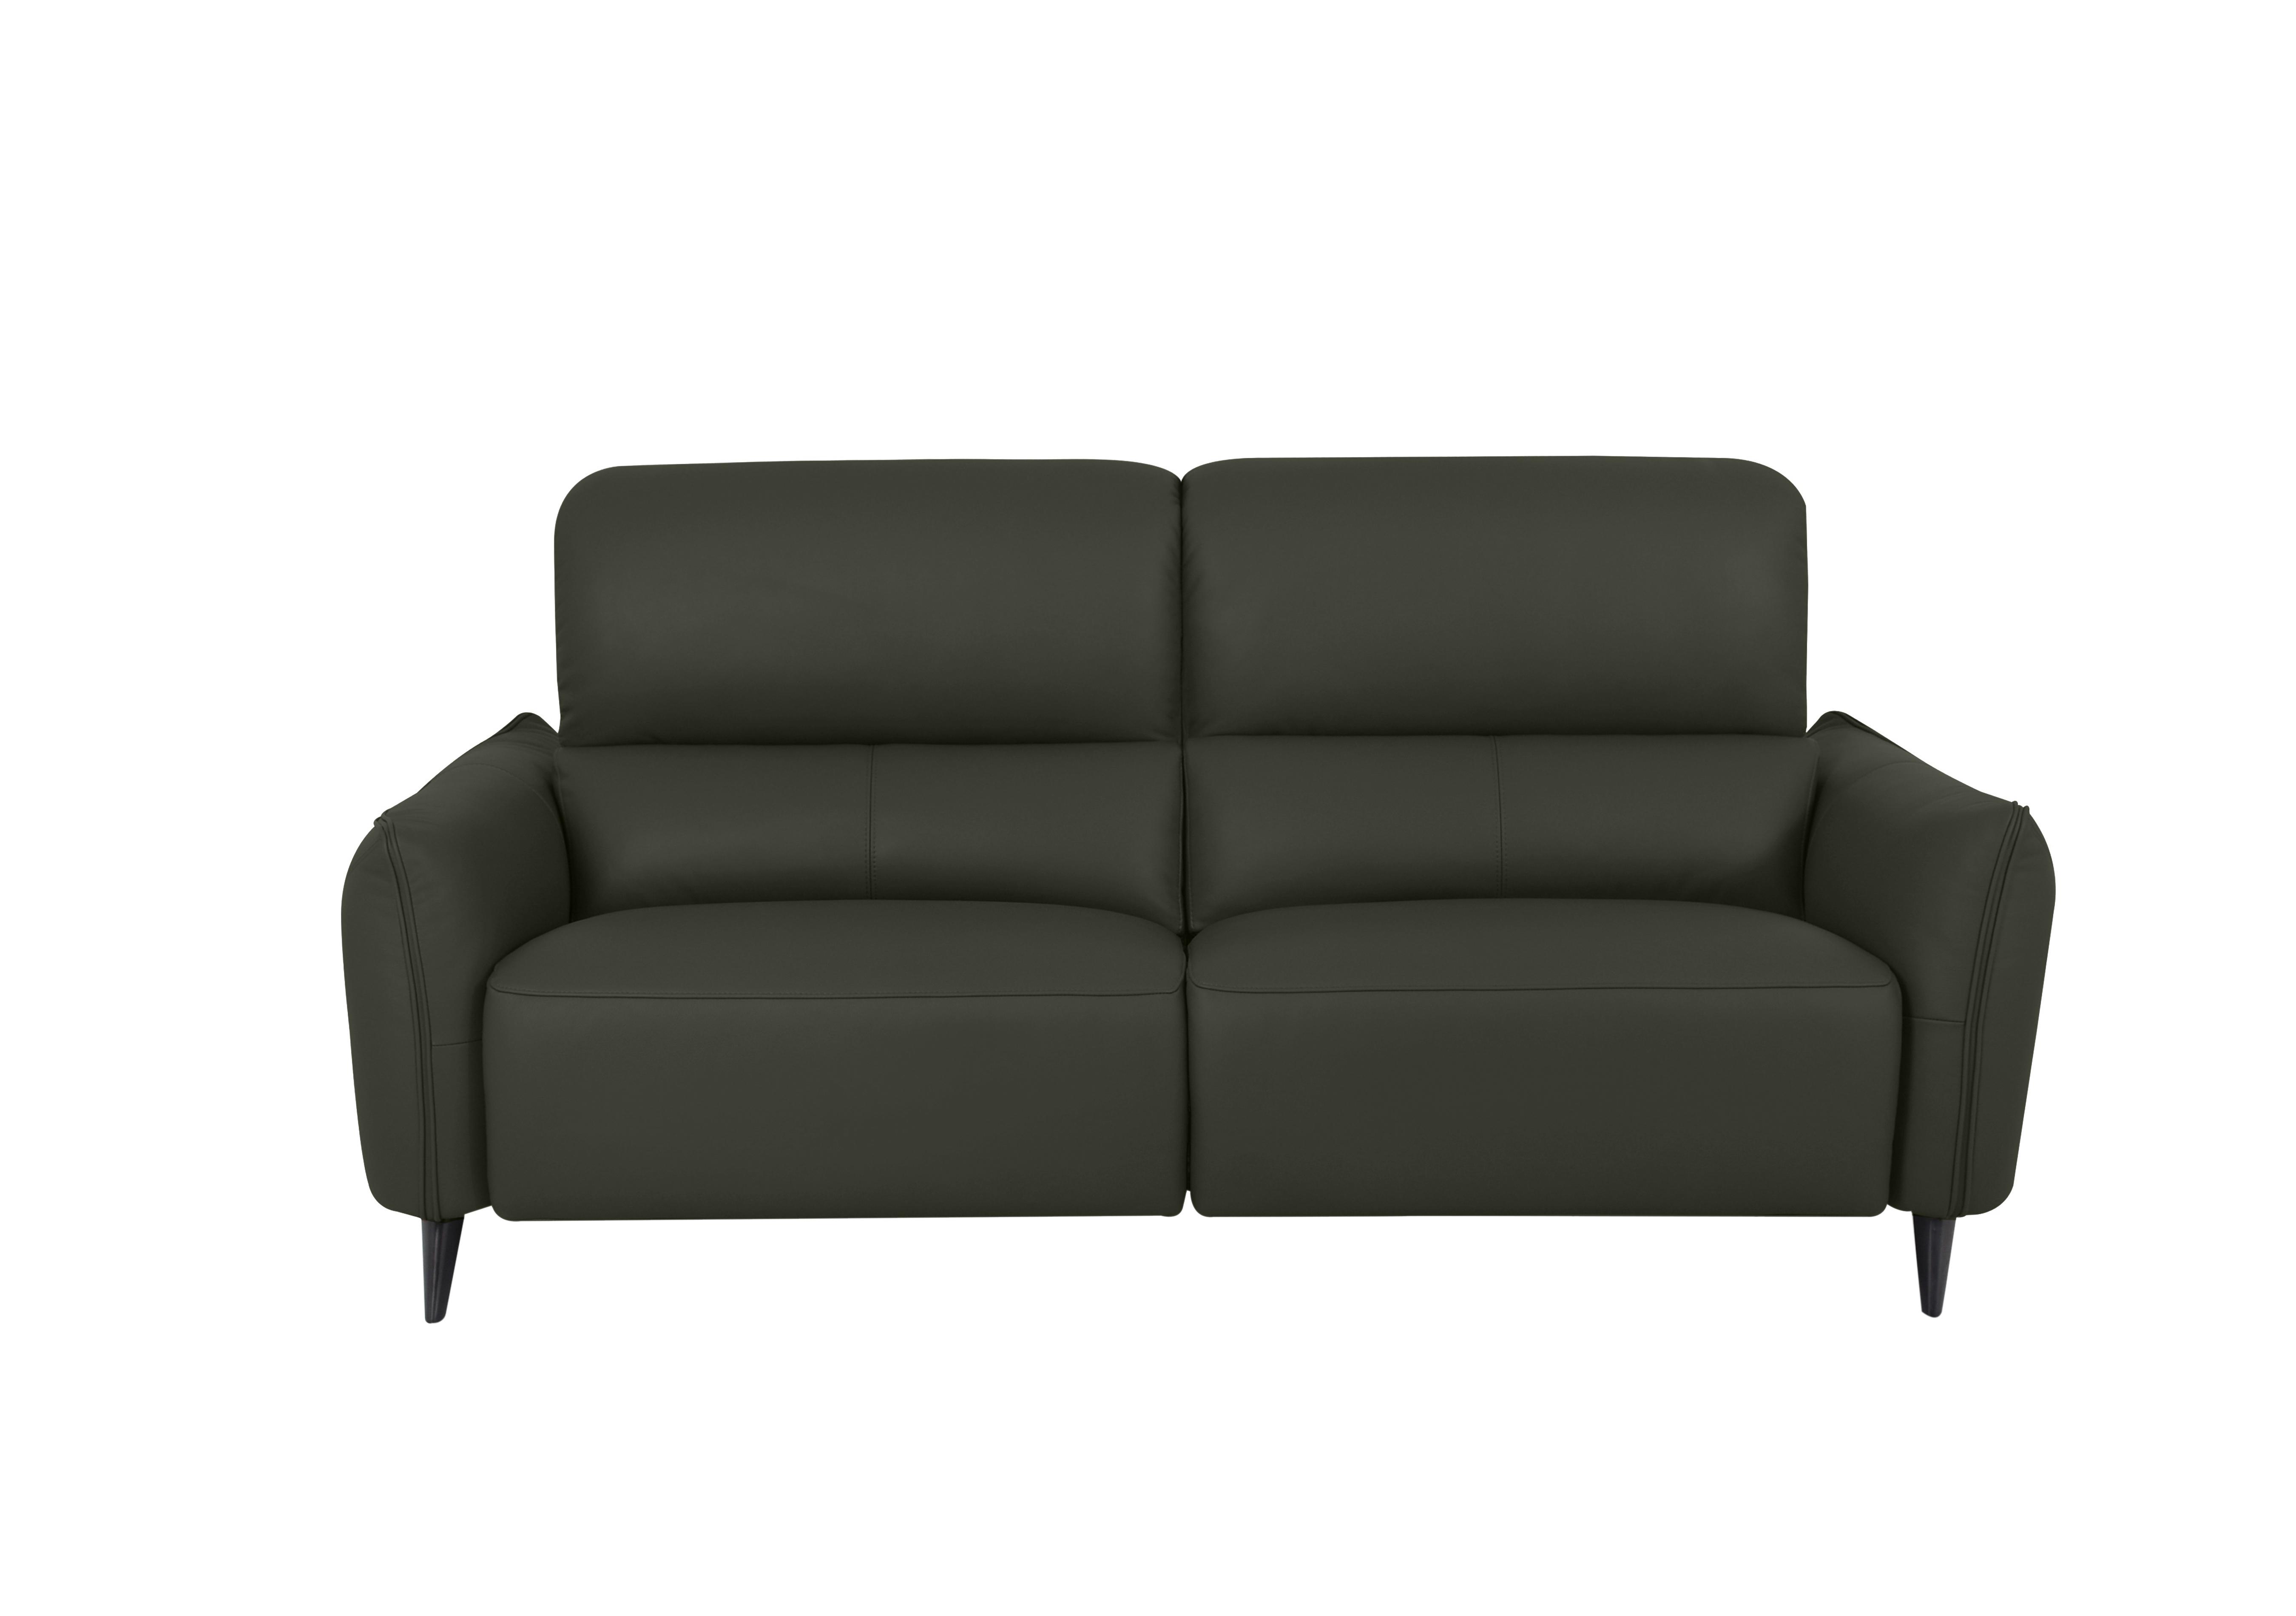 Maddox 3 Seater Leather Sofa in Nn-570e Olive Green on Furniture Village